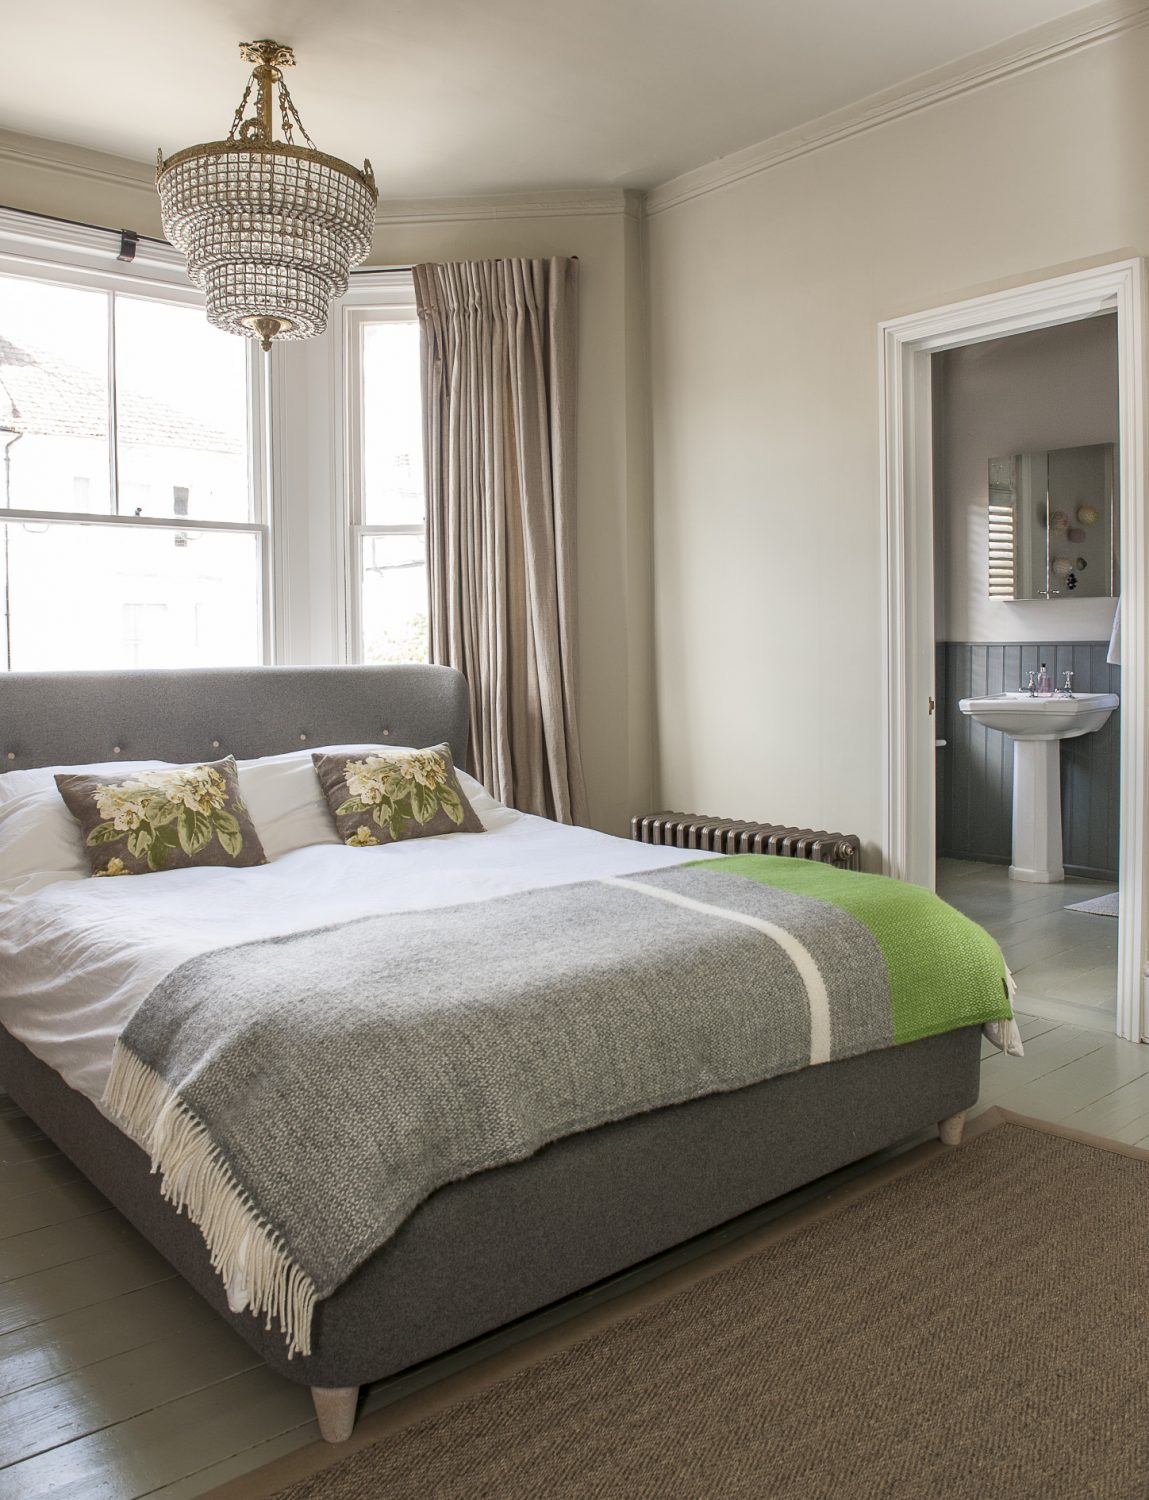 In the master bedroom at the front of the house, the bed is tucked into the bay of the window, maximising the space available and allowing space for the en suite bathroom